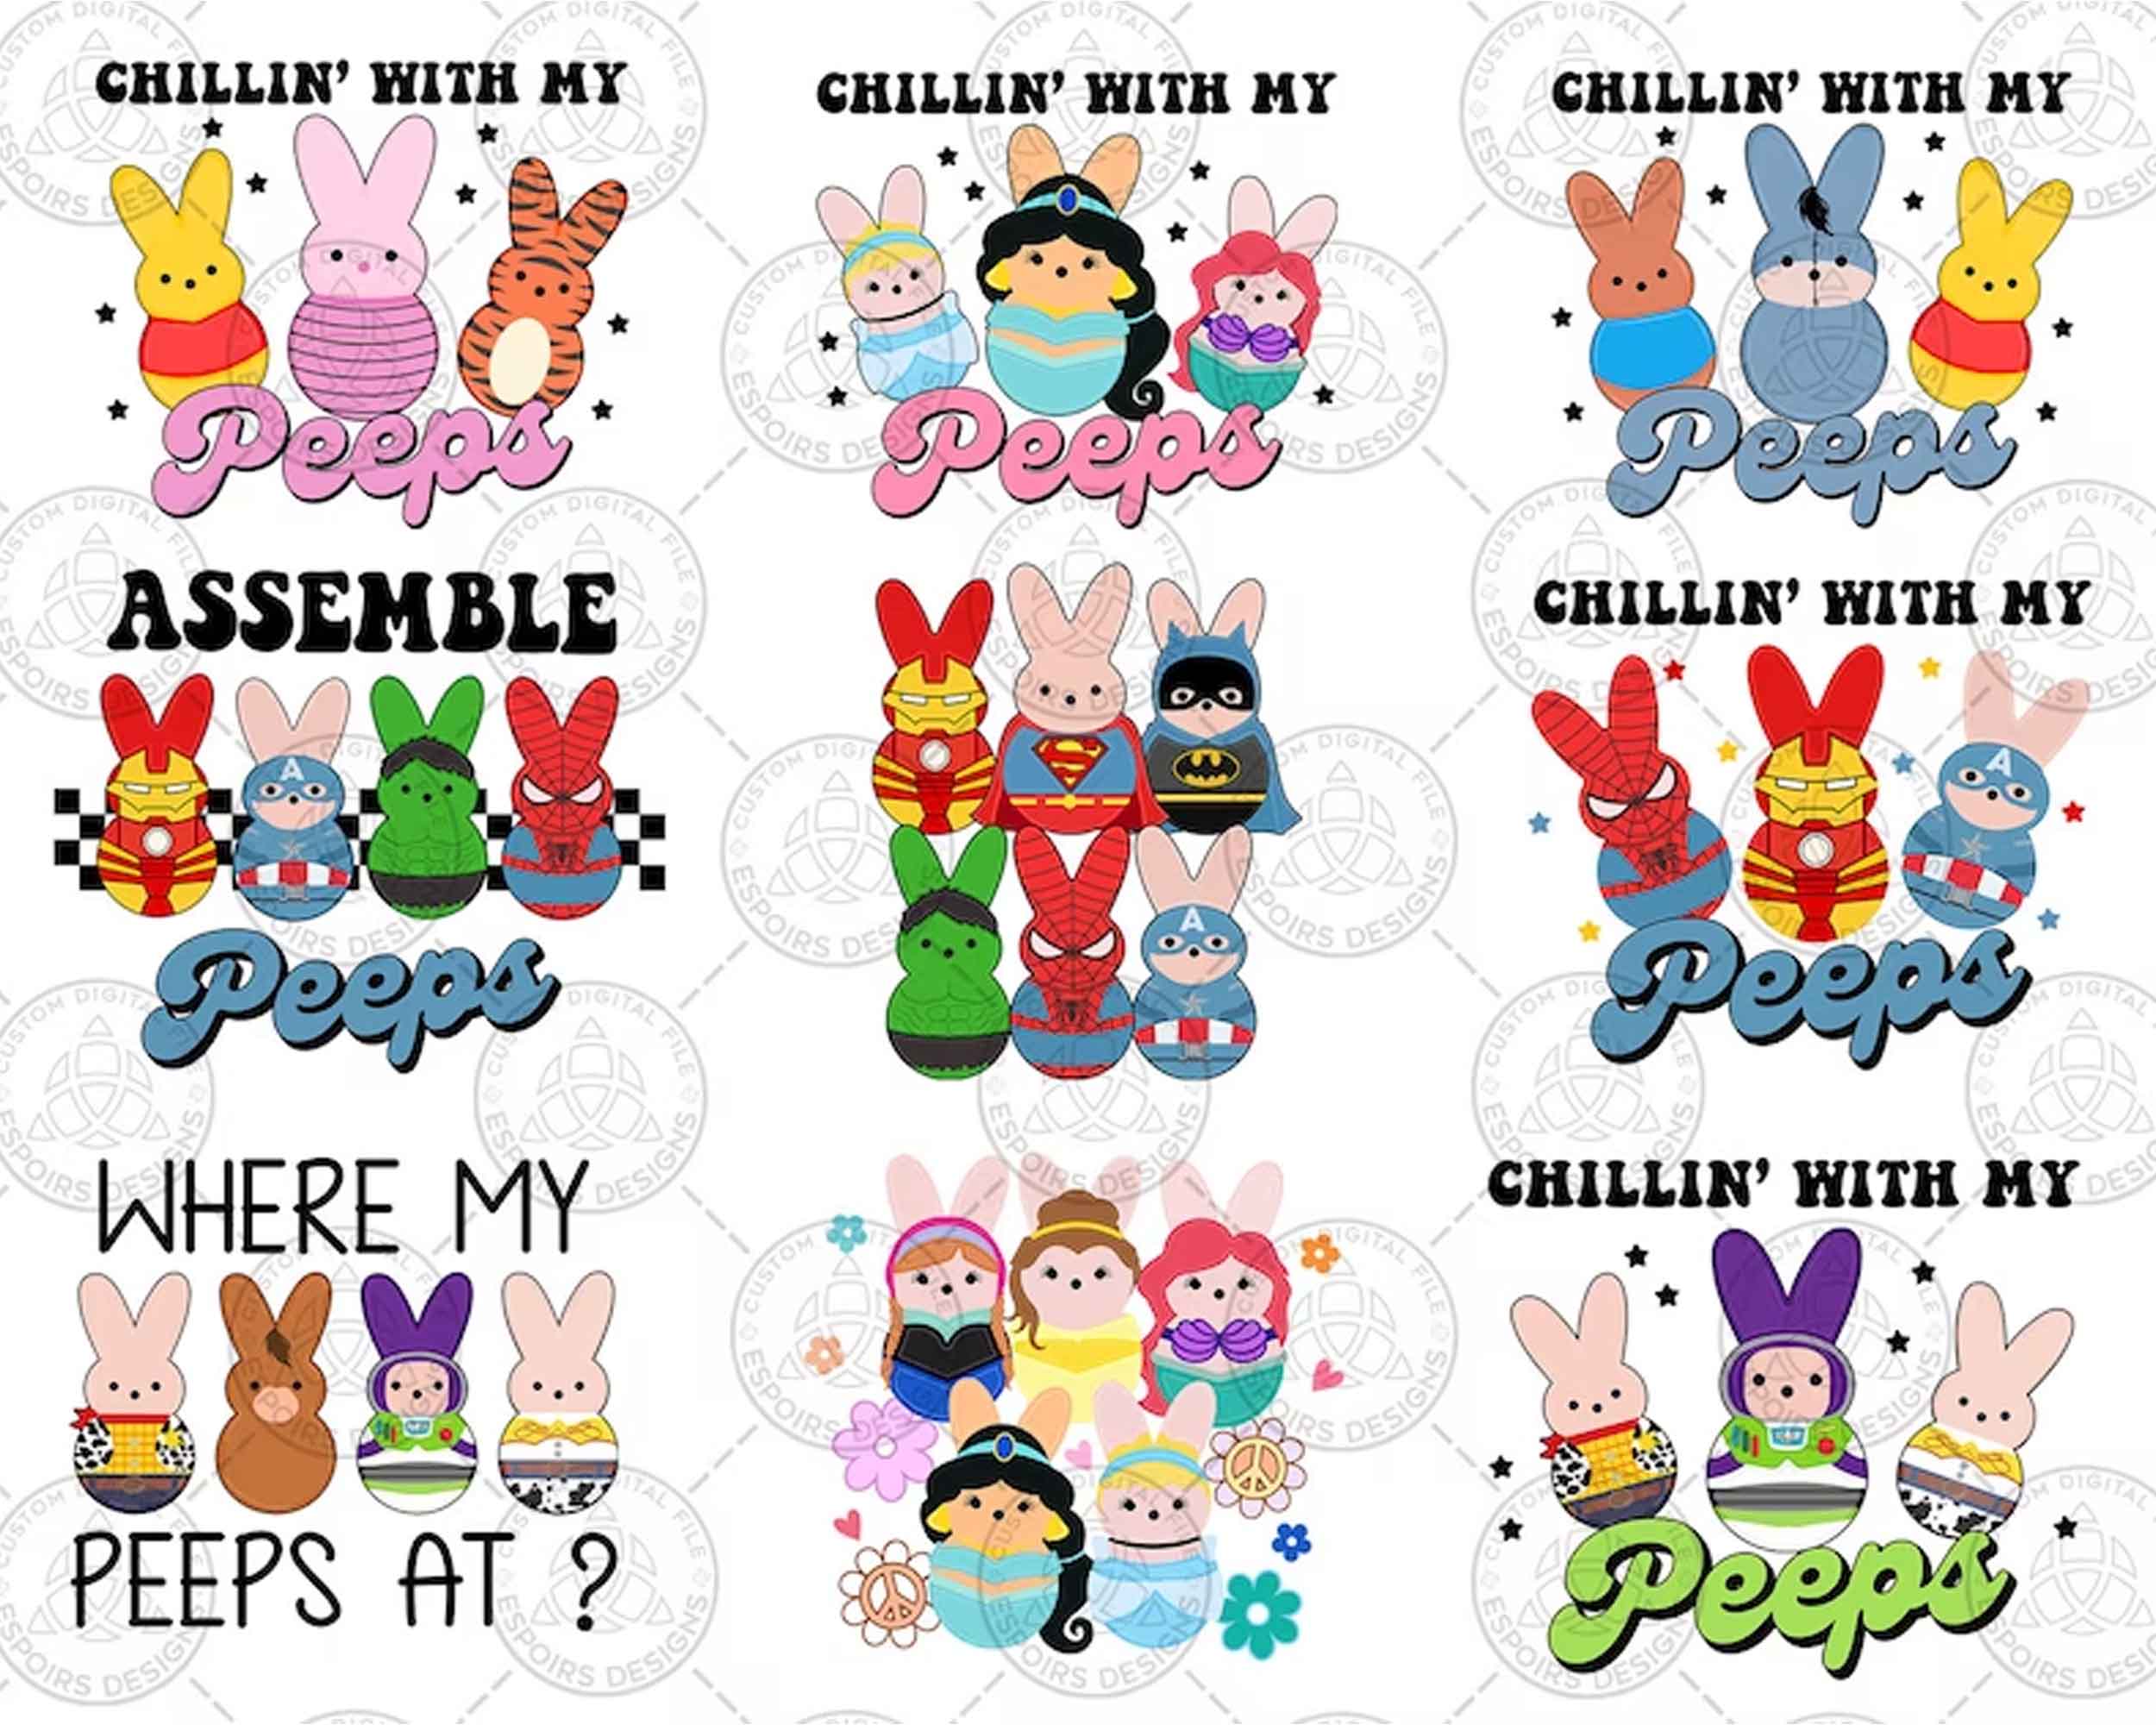 20+ Easter Cartoon Png Bundle, Easter Bunny Png Bundle, Chilling With My Peeps Png, Funny Easter Png, Cute Peeps Png, Instant Download